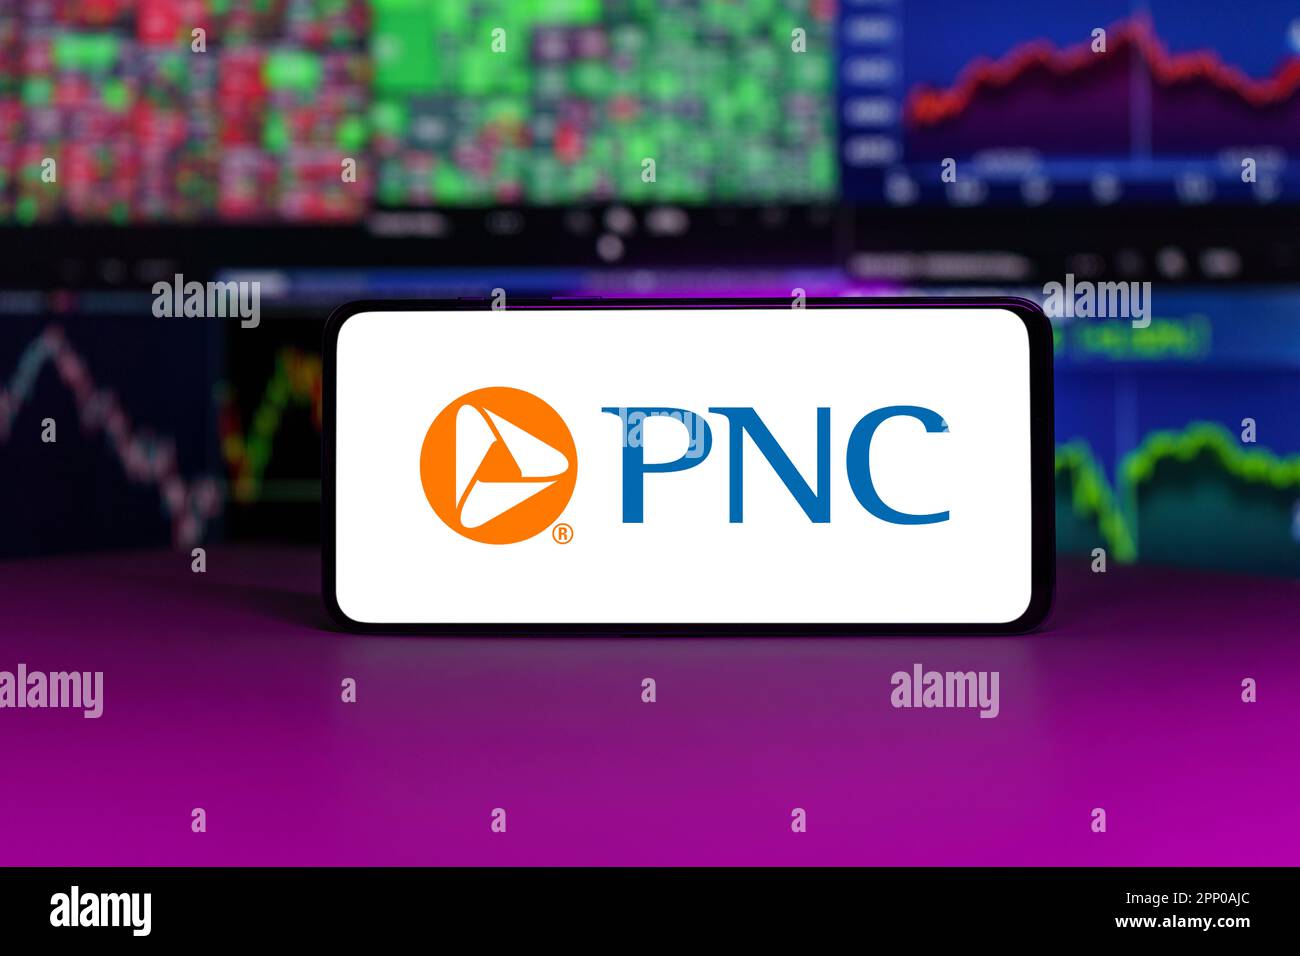 PNC financial service group on stock market index in front of stock market charts background Stock Photo